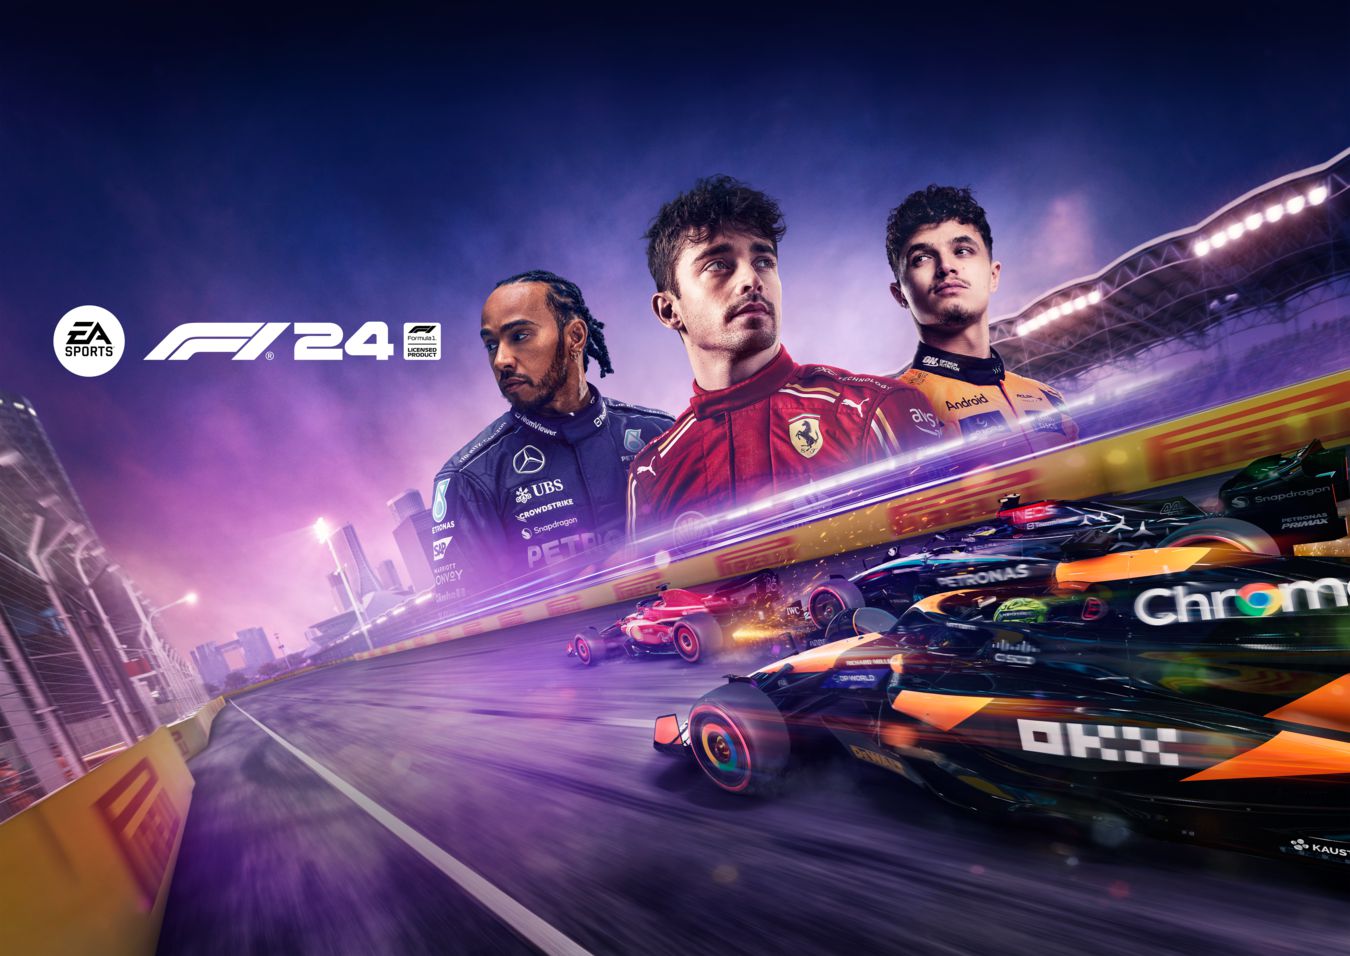 F1 24: the drivers who will be on the cover of the game revealed!